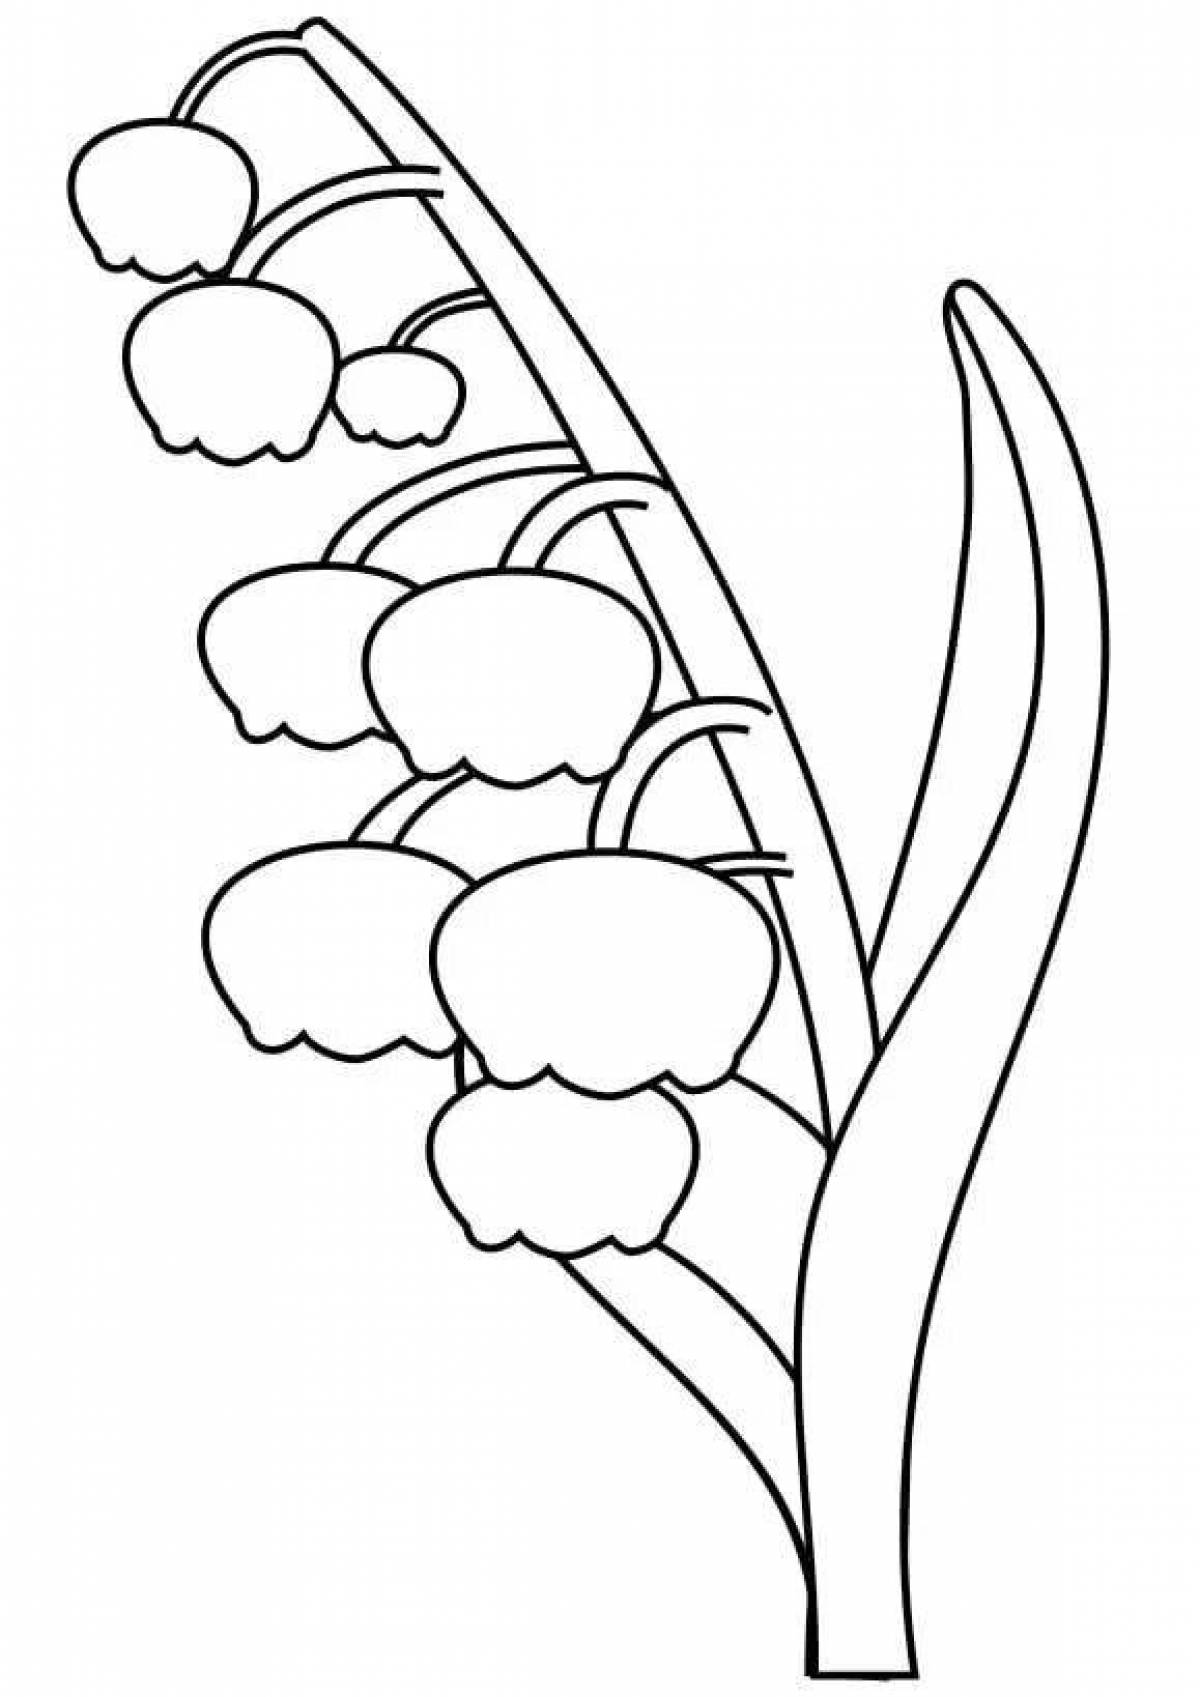 Joyful lily of the valley coloring for kids